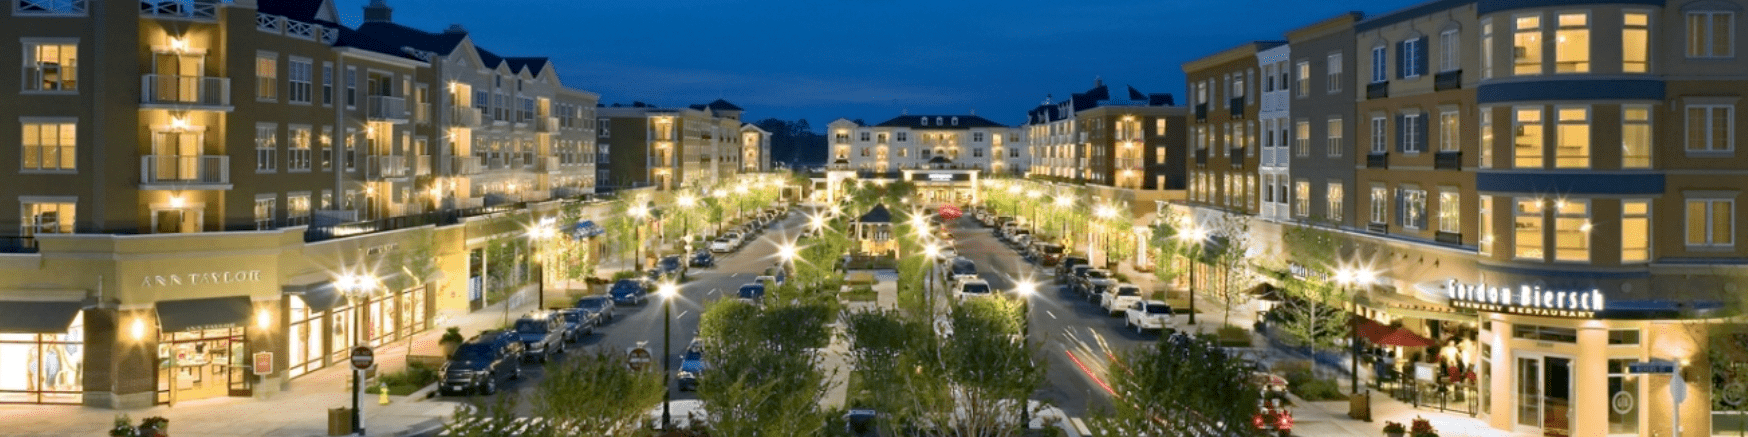 Sweetgrass Square | Myrtle Beach